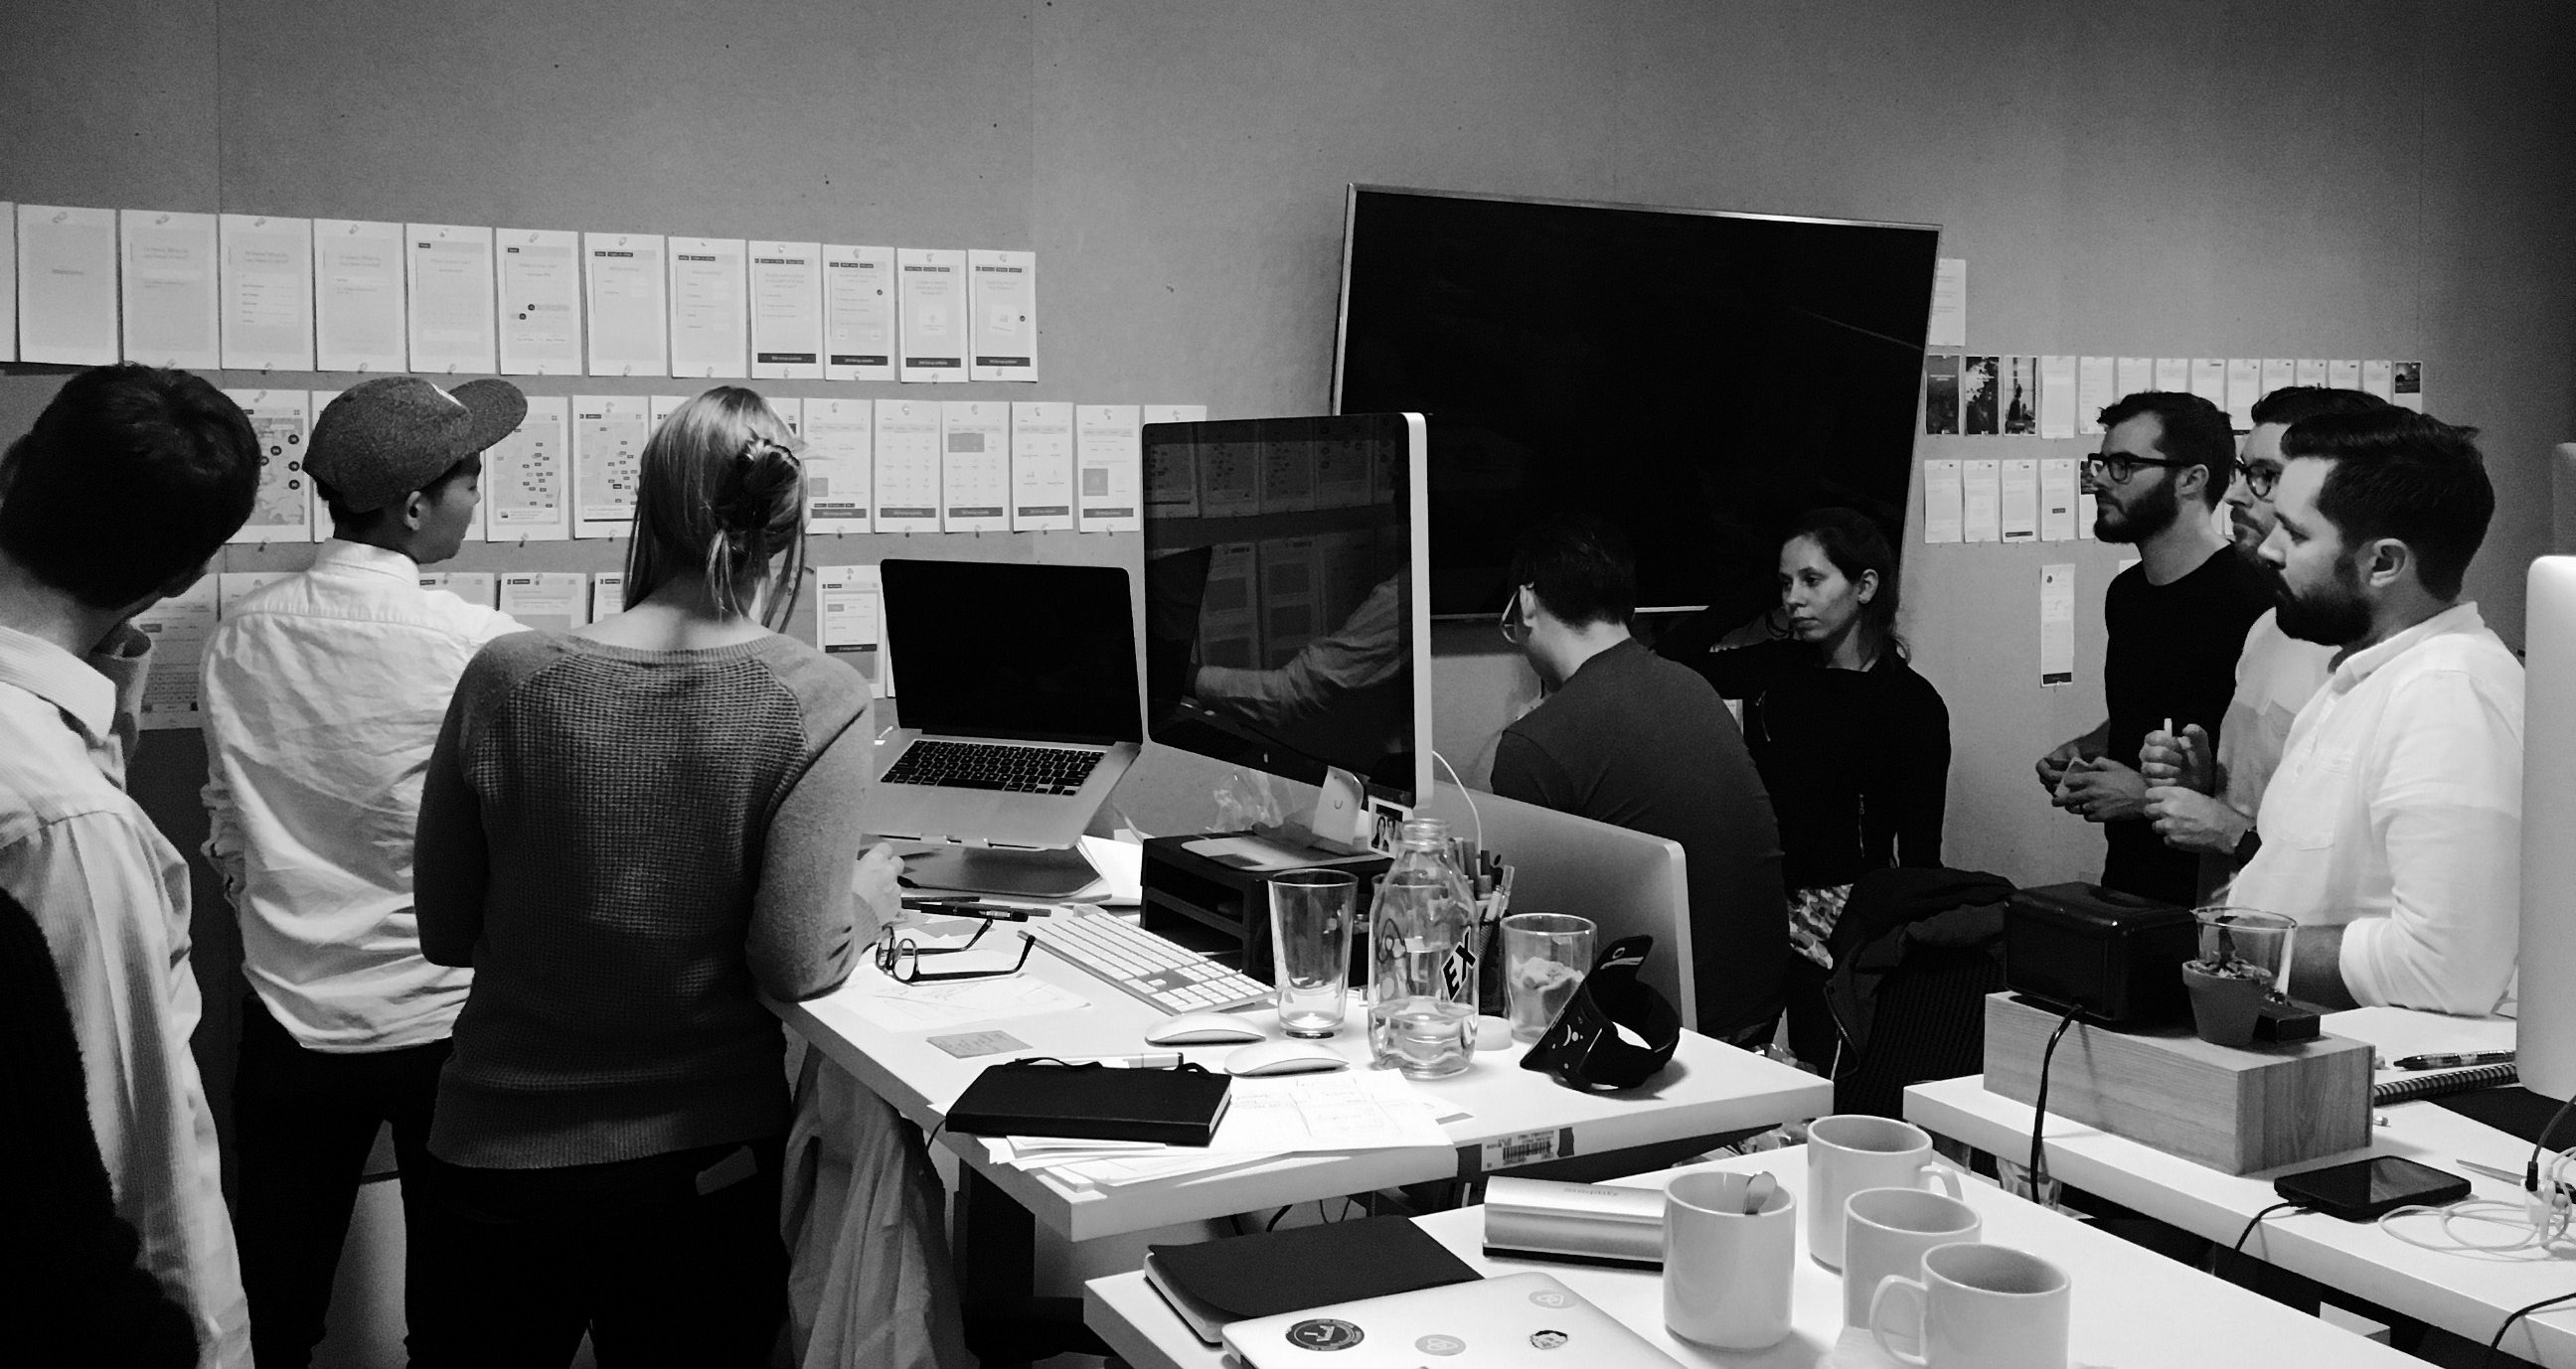 Black and white image. Katie is presenting to a group of people. Katie is standing in front of wireframes pinned up on a board.